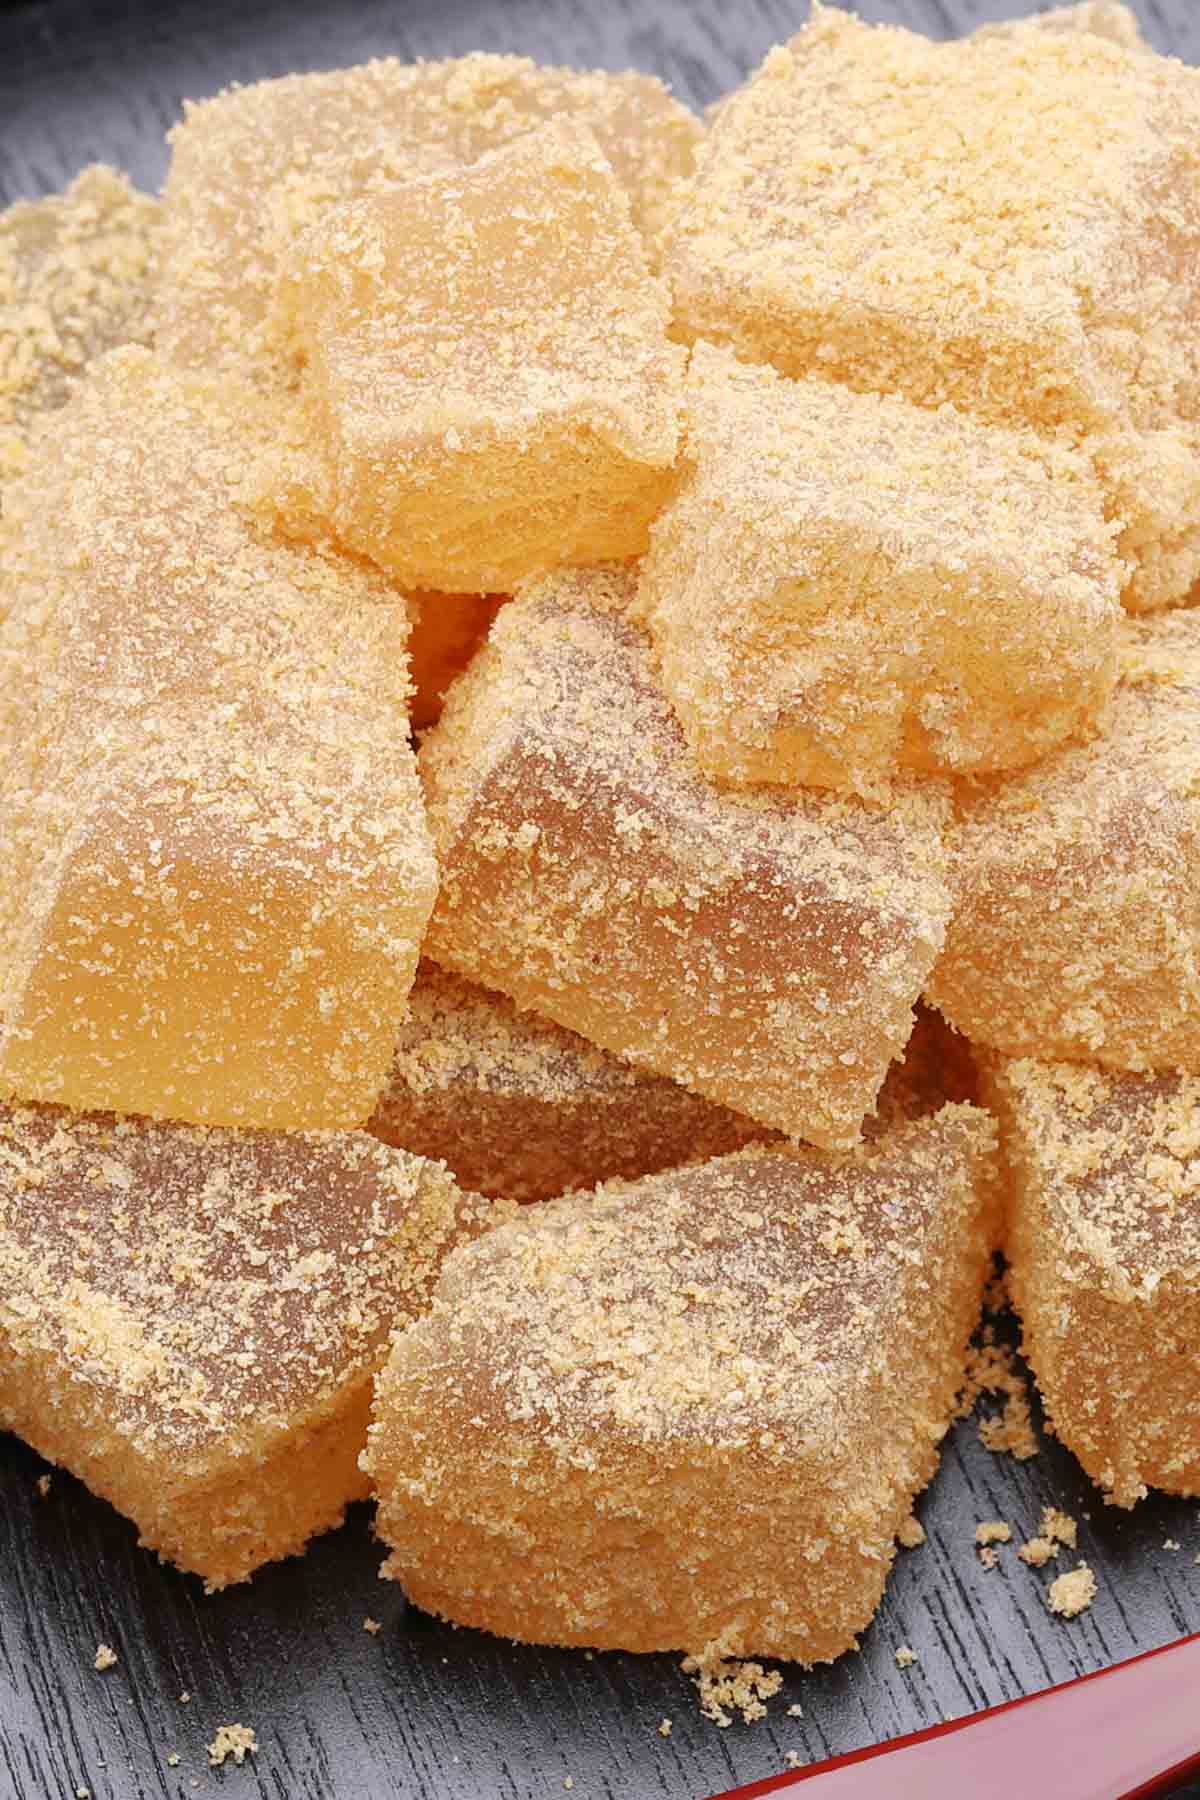 Looking for a fun and refreshing summertime treat recipe? This chilled Japanese dessert is exactly what you need. Warabi Mochi is a soft, chewy, and jelly-like confection that you can make with just a few ingredients. It’s made with warabiko, different from the mochi made with glutinous flour, but gets its name from the similarity in texture. Warabimochi is often dipped in kinako soybean powder, with an amazing nutty flavor!